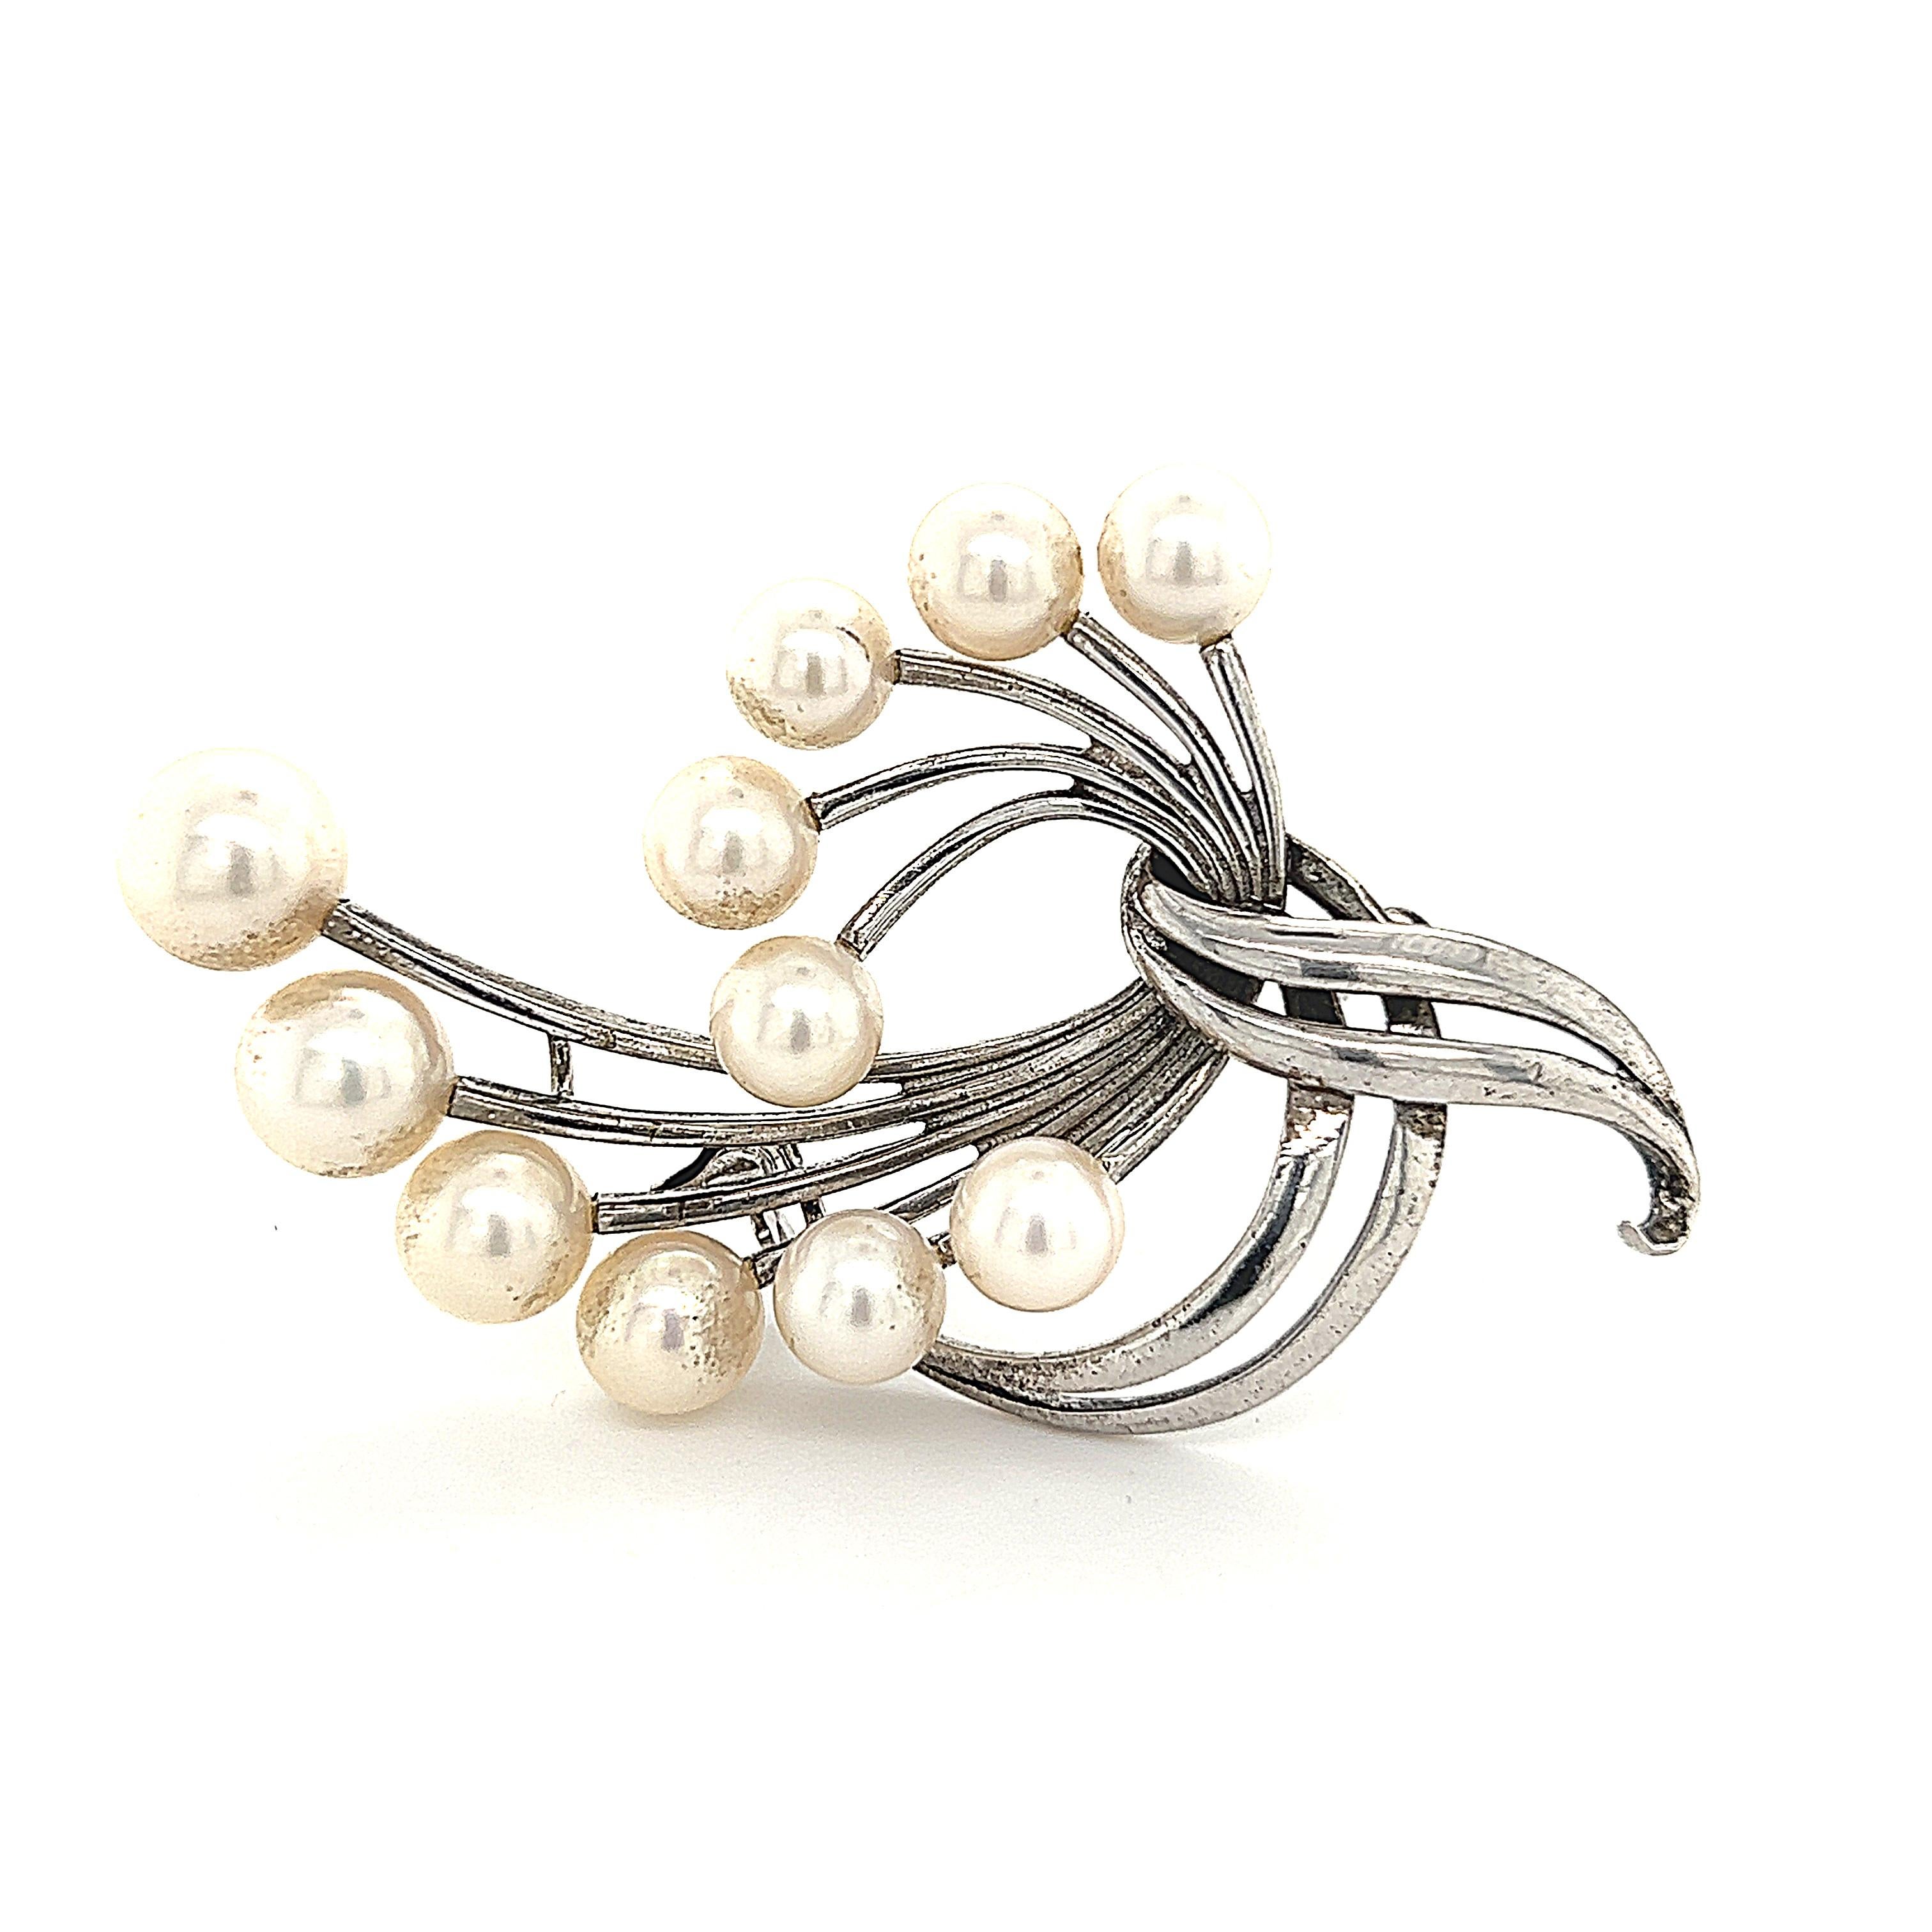 Mikimoto Estate Akoya Pearl Brooch Sterling Silver 6.6 mm 10.3g For Sale 2